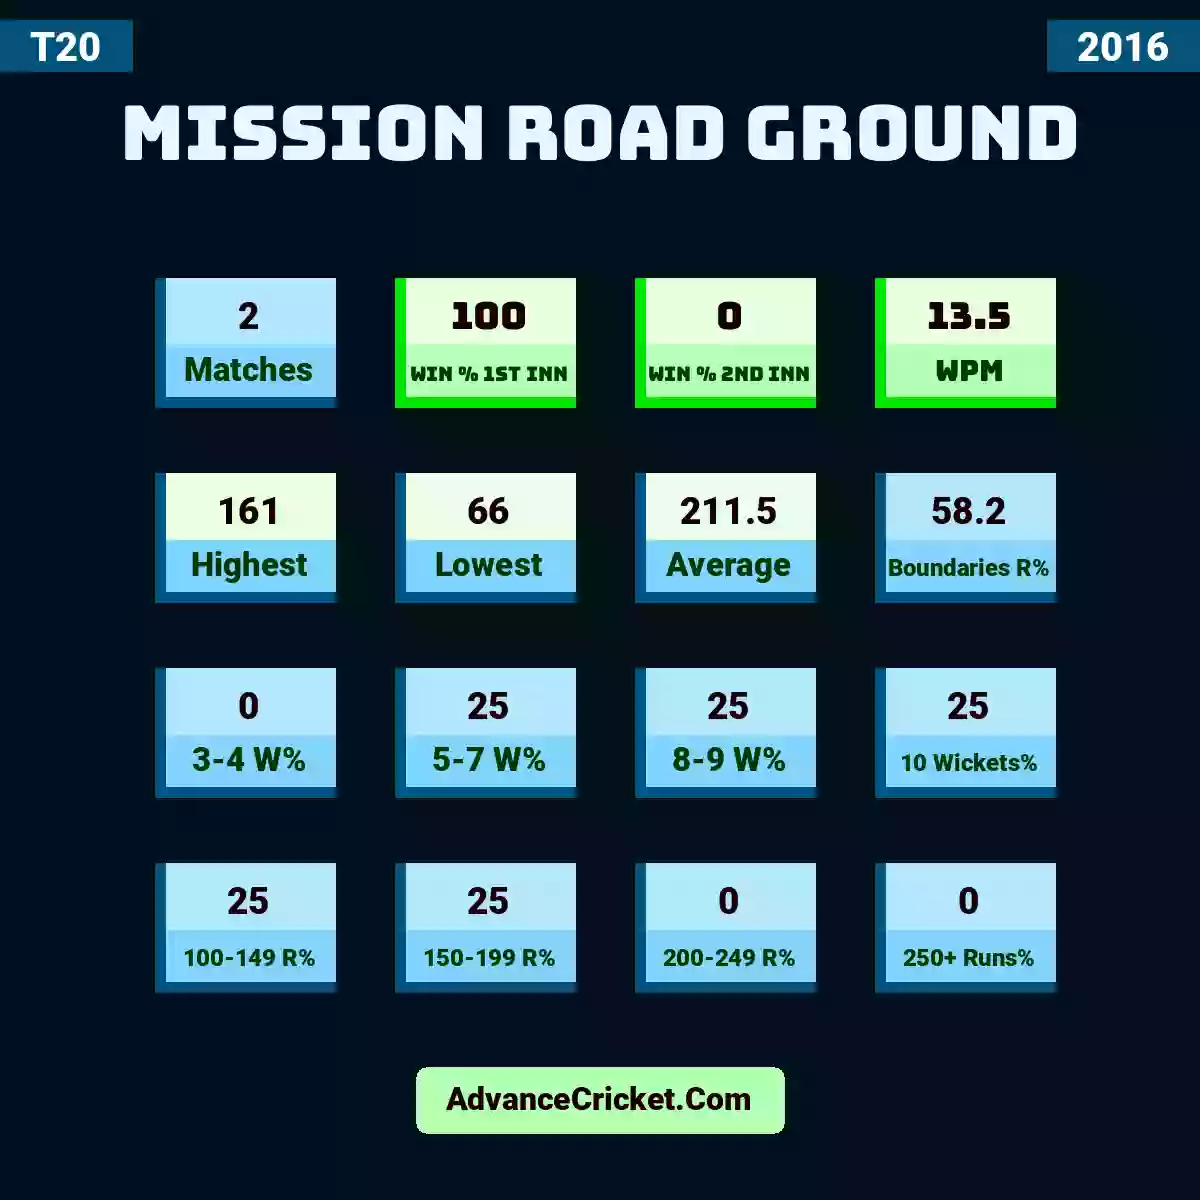 Image showing Mission Road Ground with Matches: 2, Win % 1st Inn: 100, Win % 2nd Inn: 0, WPM: 13.5, Highest: 161, Lowest: 66, Average: 211.5, Boundaries R%: 58.2, 3-4 W%: 0, 5-7 W%: 25, 8-9 W%: 25, 10 Wickets%: 25, 100-149 R%: 25, 150-199 R%: 25, 200-249 R%: 0, 250+ Runs%: 0.